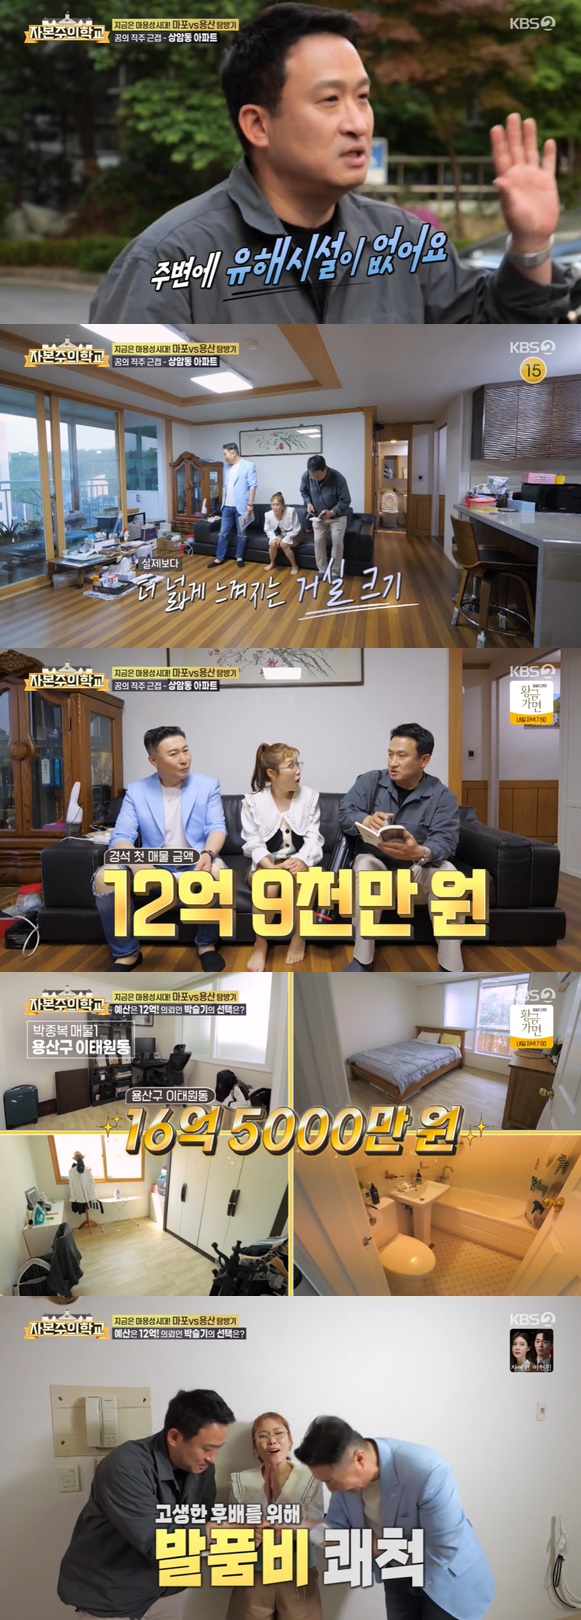 On the 5th KBS 2TV entertainment capitalist school, Seo Kyung-seok was introduced to the broadcaster Park Seul-gi.Park jong-bok, Seo Kyung-seok stepped up to save Park Seul-gis new home; the budget that Park Seul-gi thought was 1.2 billion.Seo Kyung-seok took Park Seul-gi to an apartment in Sangam-dong, Maporissa District, DJ.MCs who watched this said, Entertainers prefer DJ Maporissagu, which is closely related to broadcasters.Seo Kyung-seok said: You can walk to the station, and you have three lines, so traffic is good; its a high-tech industrial center, so there are no harmful facilities around.There are many parks around, Park Seul-gi said, I would like to raise a child. The sale, which was completed in 2003, was in the mid-20s with three rooms and two toilets, which did not exceed the budget set by Park Seul-gi at 1.29 billion won.Seo Kyung-seok then introduced an apartment in Daeheung-dong, which he explained is a densely populated area comparable to Daechi-dong and Mok-dong, and is promoting remodeling.However, the remodeling contribution is not small, and the sale, which boasts a clean interior, consists of three rooms and one toilet.Ill go up at least three or four pages after the remodeling, he said, adding that he would go up to 1.7 billion won.But Park Seul-gi made the final Choices of one of the sales that Park jong-bok introduced in the last broadcast.The property is an apartment-type townhouse located in Itaewon-dong, Yongsan District, which boasts a warm and cozy interior.Park Seul-gi said, I have a dream DL in the Yongsan District, he said. It is a construction without an elevator, but the landscaping is so good.Is not it too much to fuck with fame? asked Seo Kyung-seok, who joked that he was right and laughed.Park jong-bok gave a warm heart to Seo Kyung-seok by yielding the starting fee.Photo = KBS 2TV broadcast screen